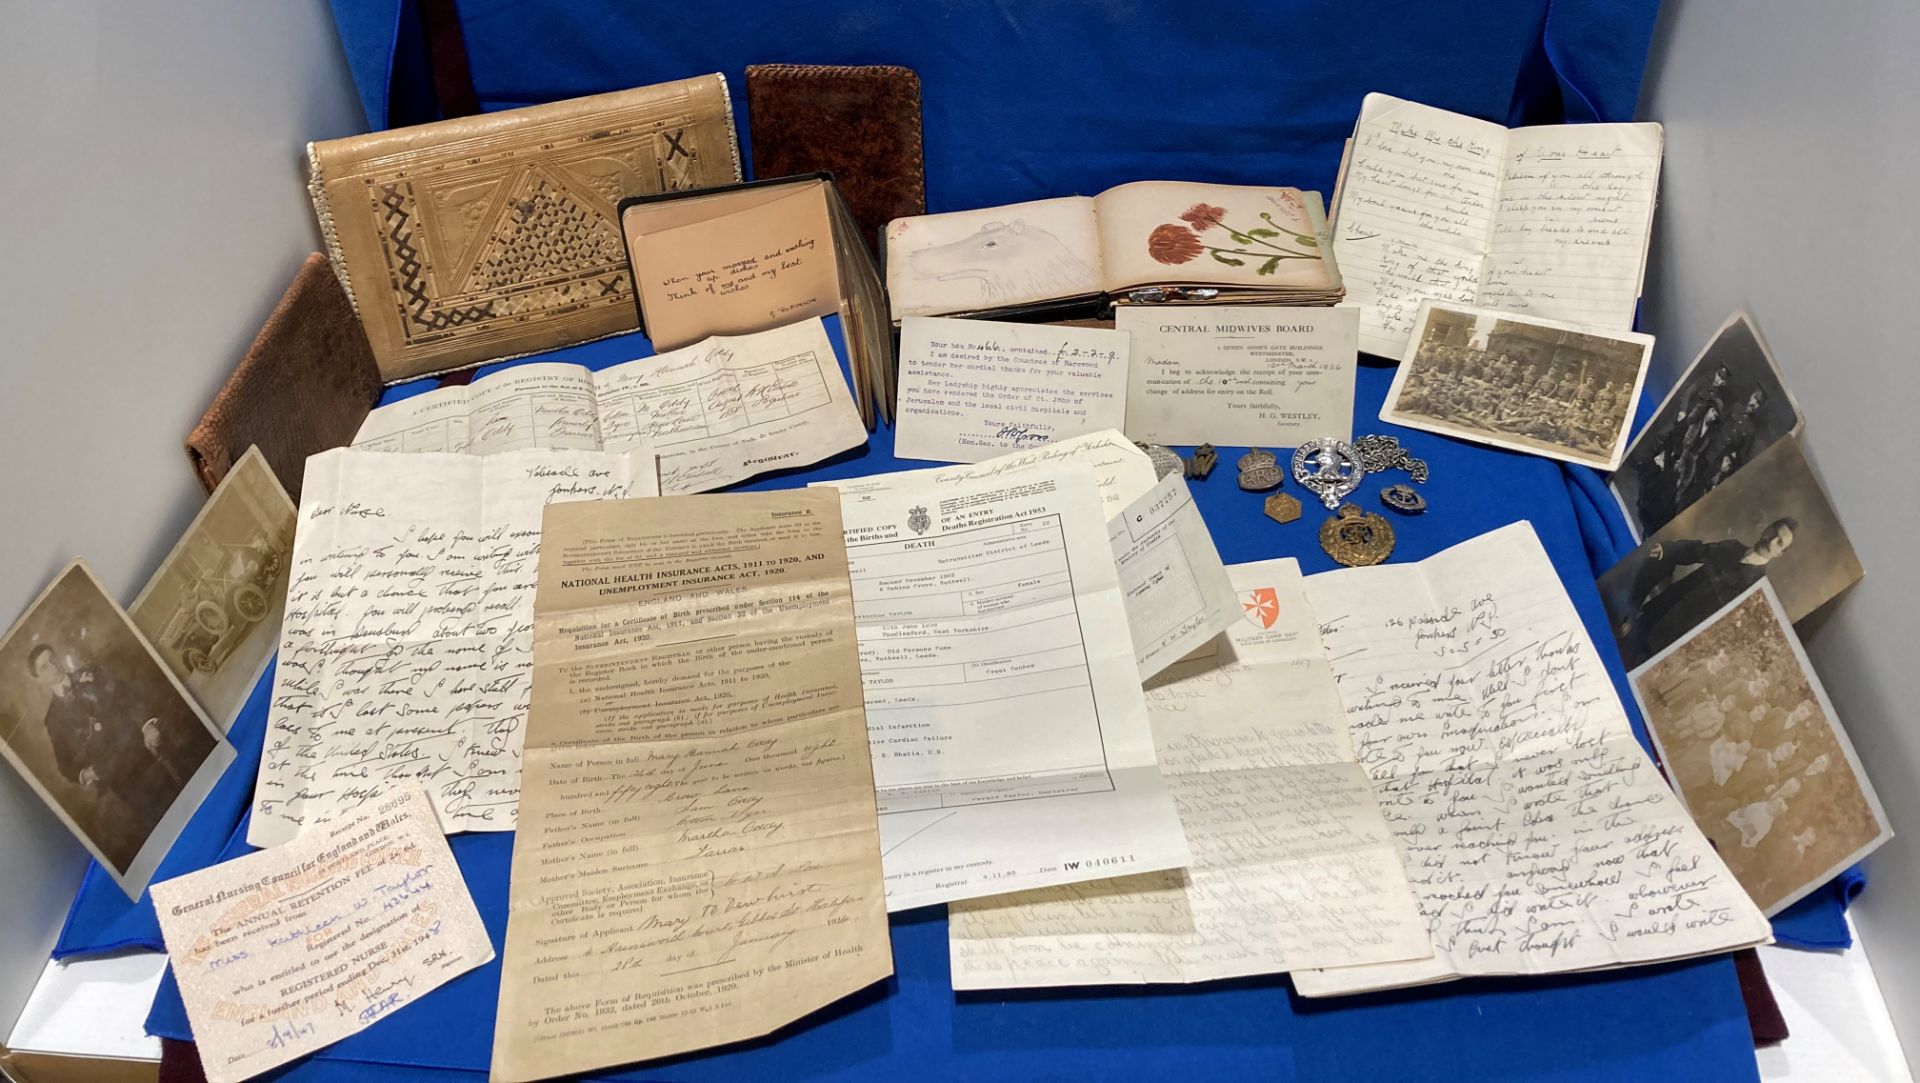 Contents to tray - an interesting collection of ephemera,